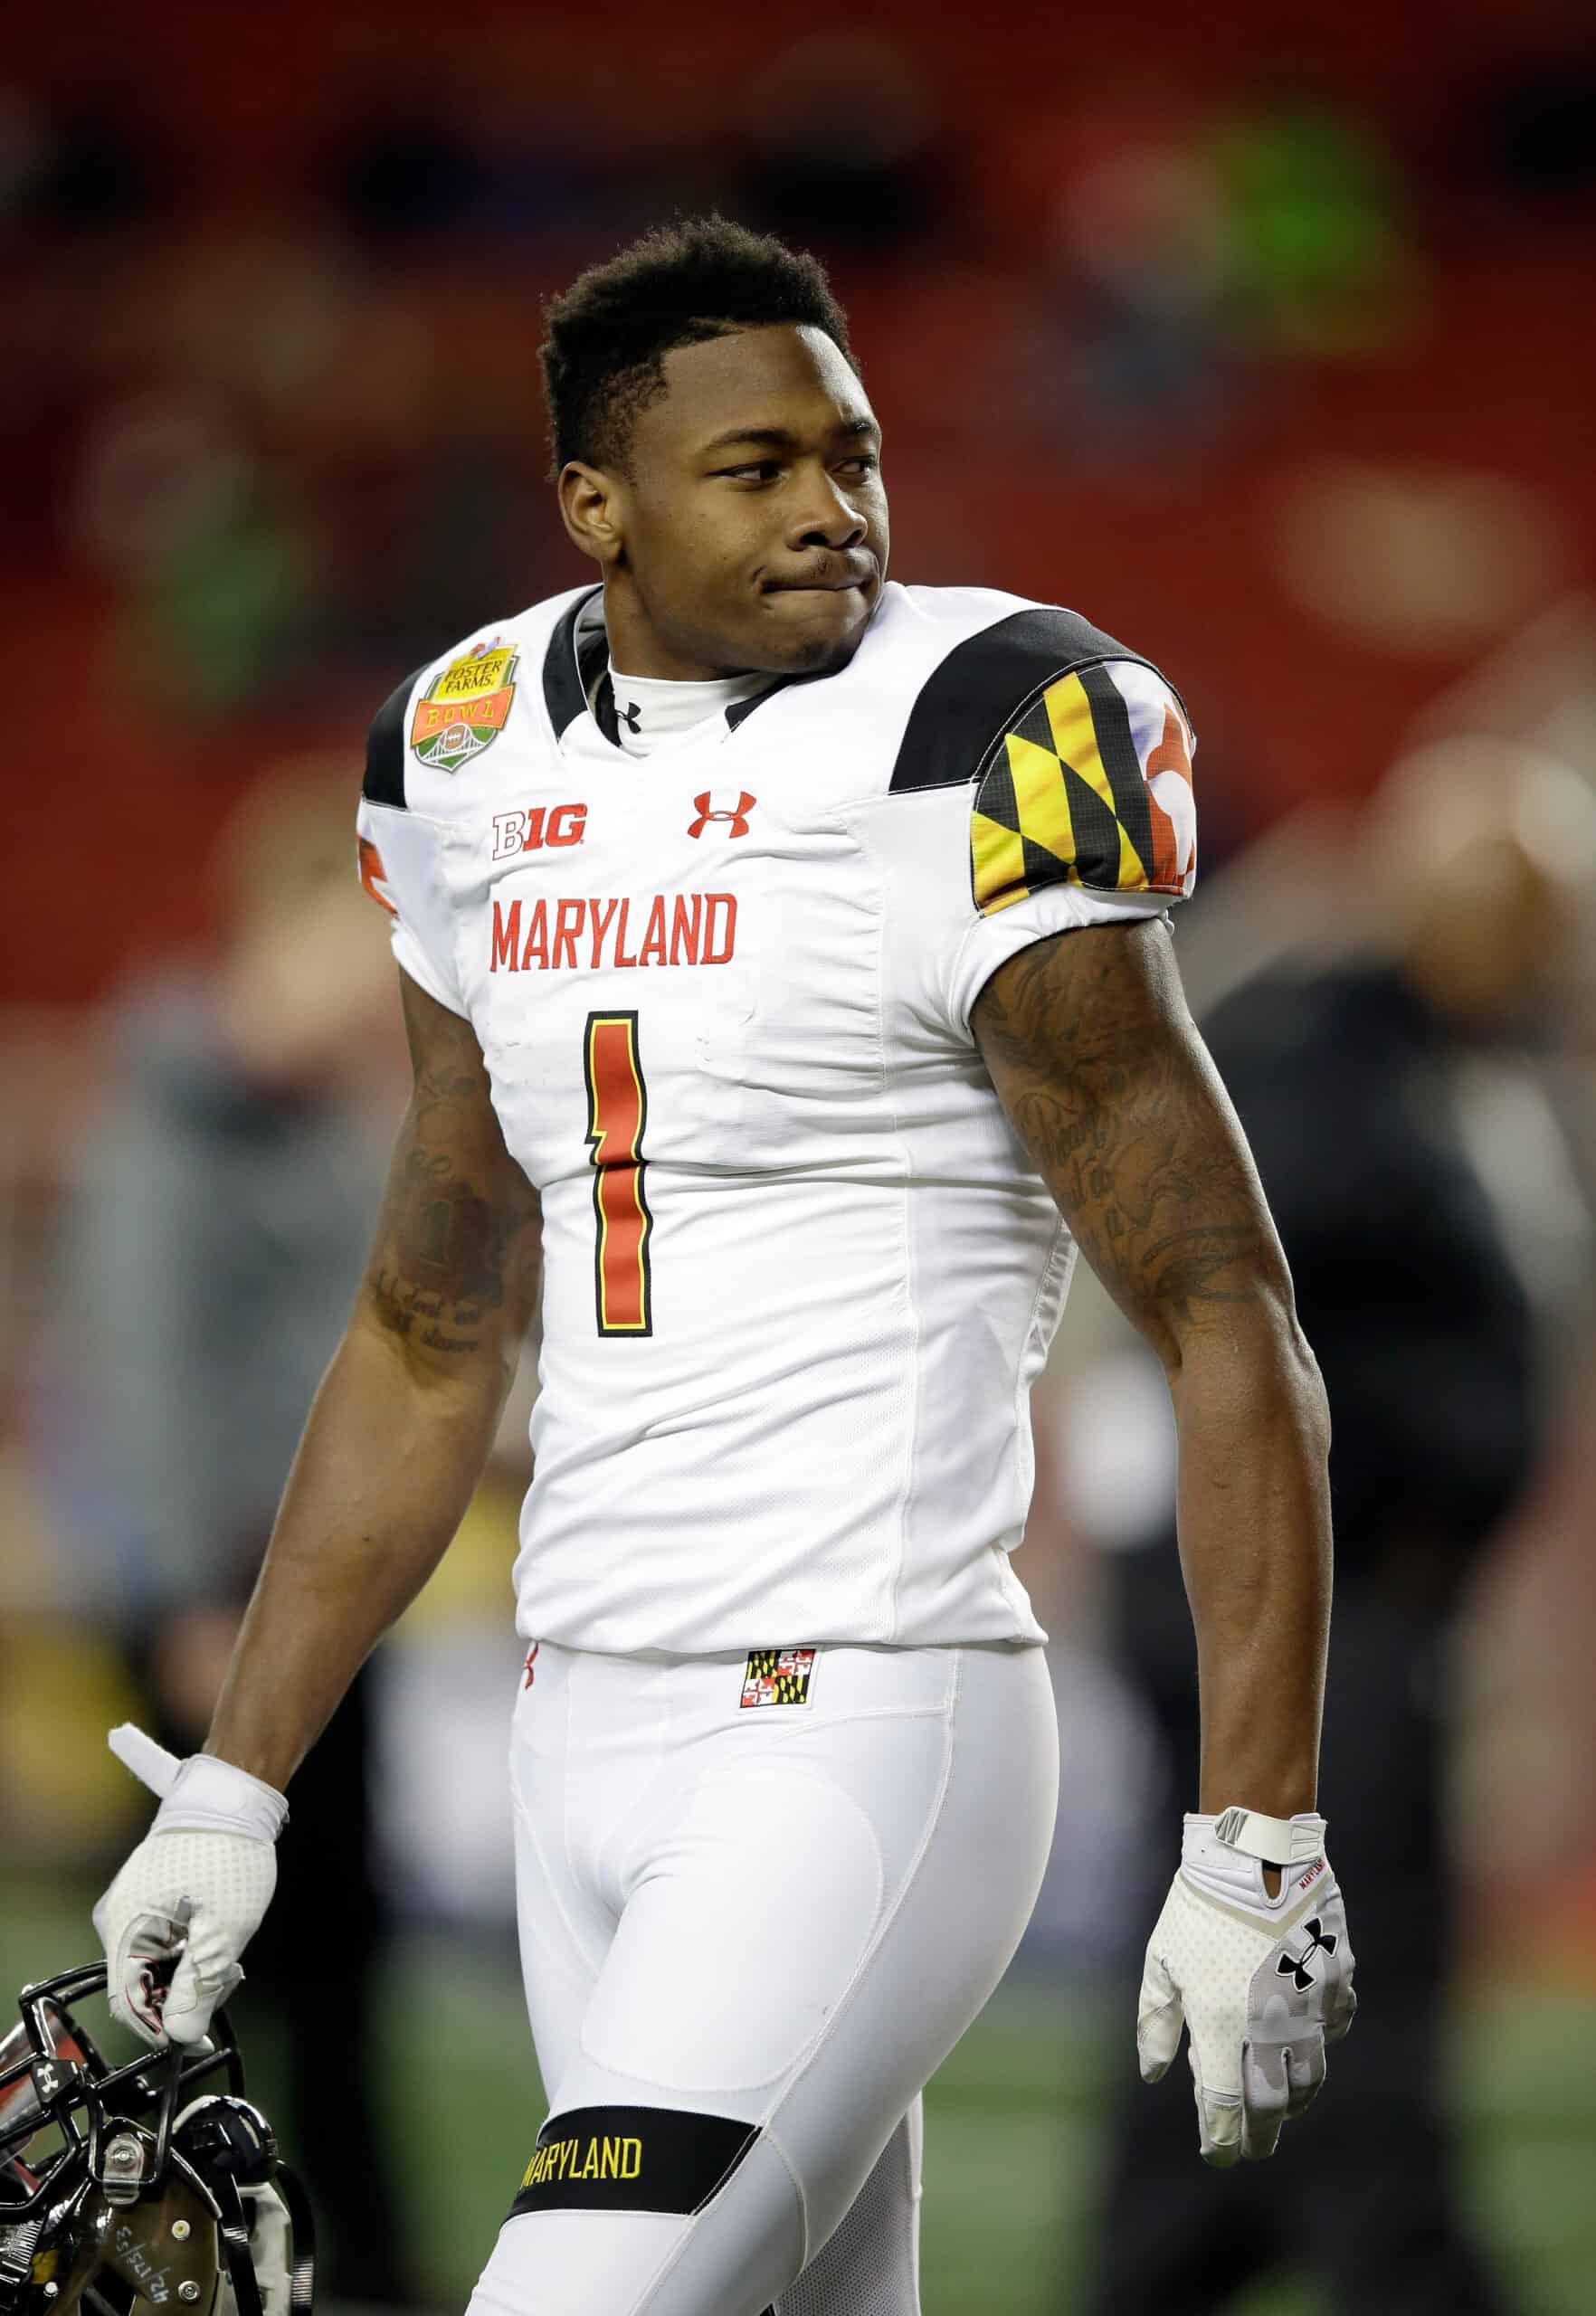 SANTA CLARA, CA - DECEMBER 30: Stefon Diggs #1 of the Maryland Terrapins warms up before their game against the Stanford Cardinal in the Foster Farms Bowl at Levi's Stadium on December 30, 2014 in Santa Clara, California. (Photo by Ezra Shaw/Getty Images)